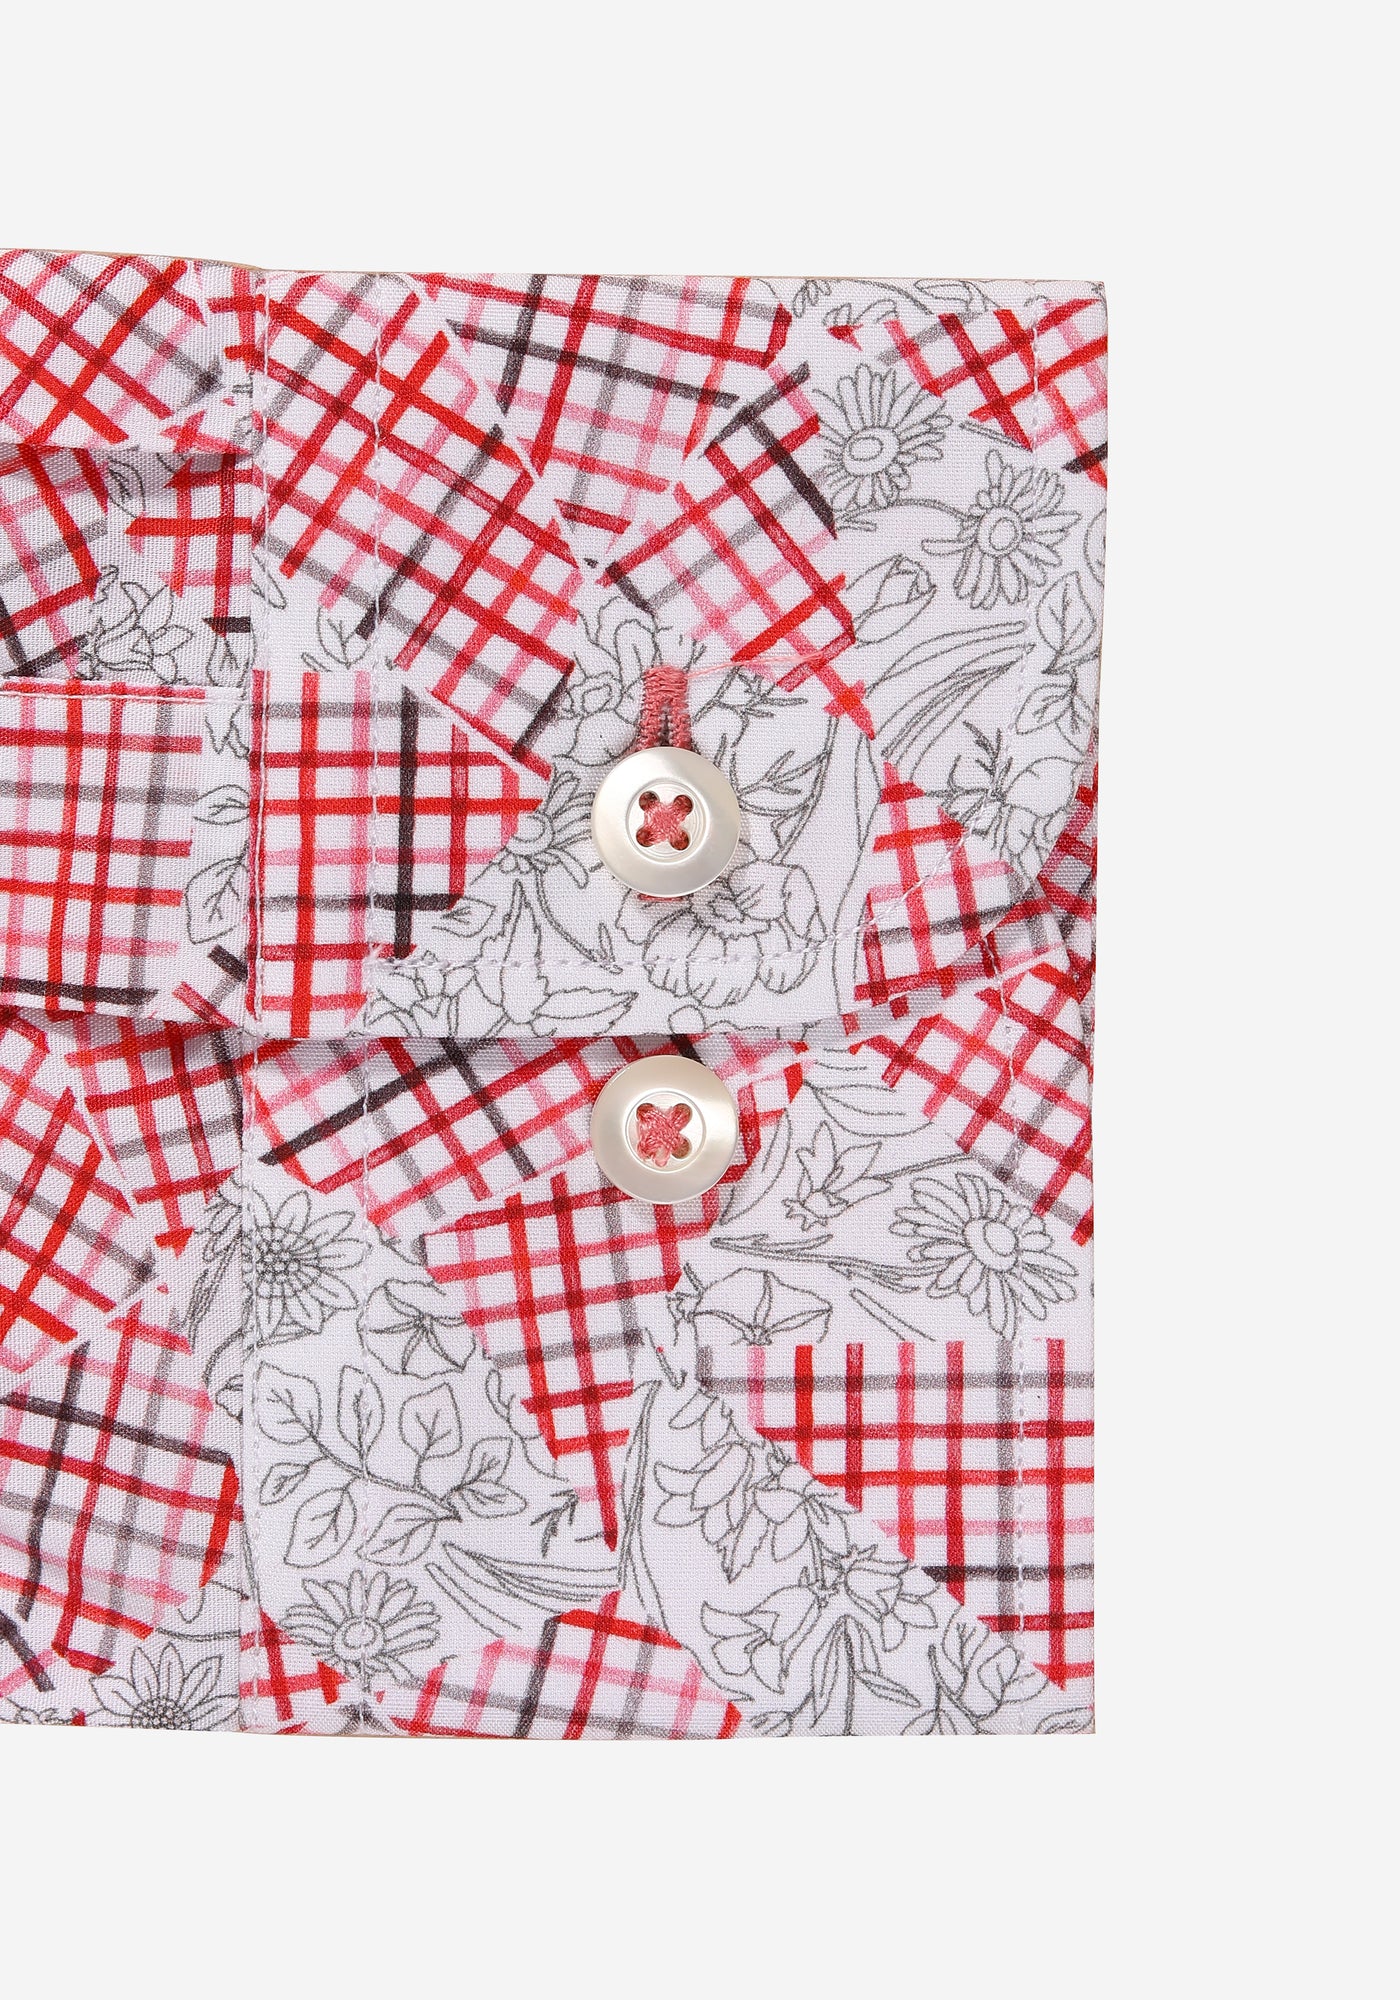 Red White Floral Checked Poplin Shirt